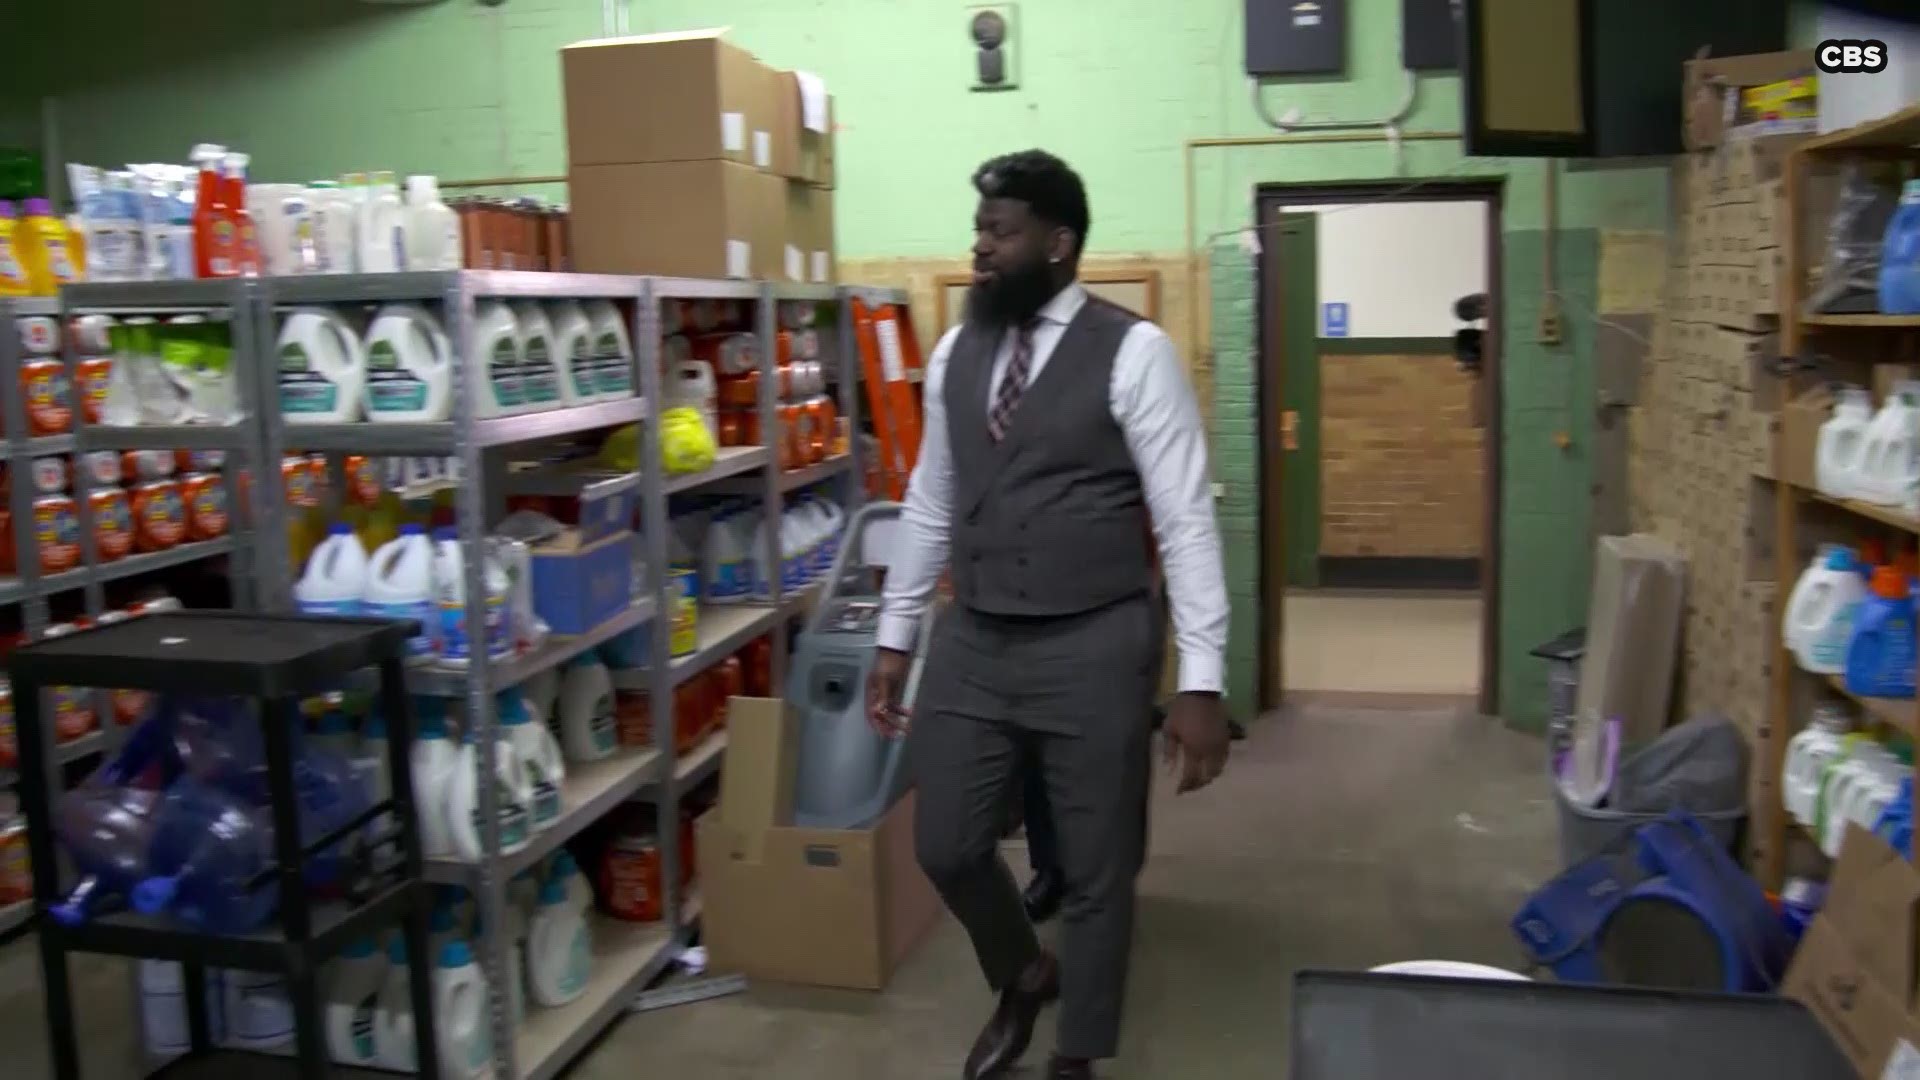 "The big room" at West Side High School in Newark, New Jersey, is where principal Akbar Cook stores hundreds of donated bottles of laundry detergent, fabric softener and dryer sheets. The big room was a solution to a big problem.